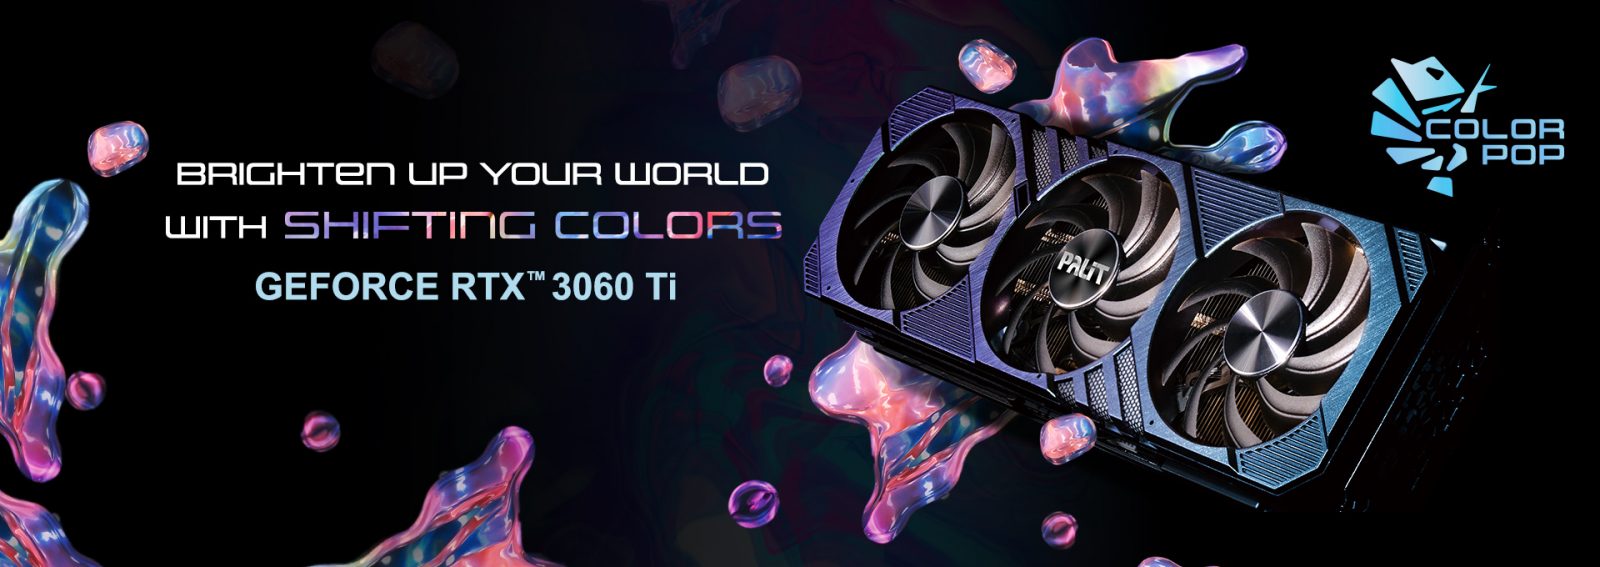 PALIT introduces GeForce RTX 3060 Ti ColorPOP graphics card with